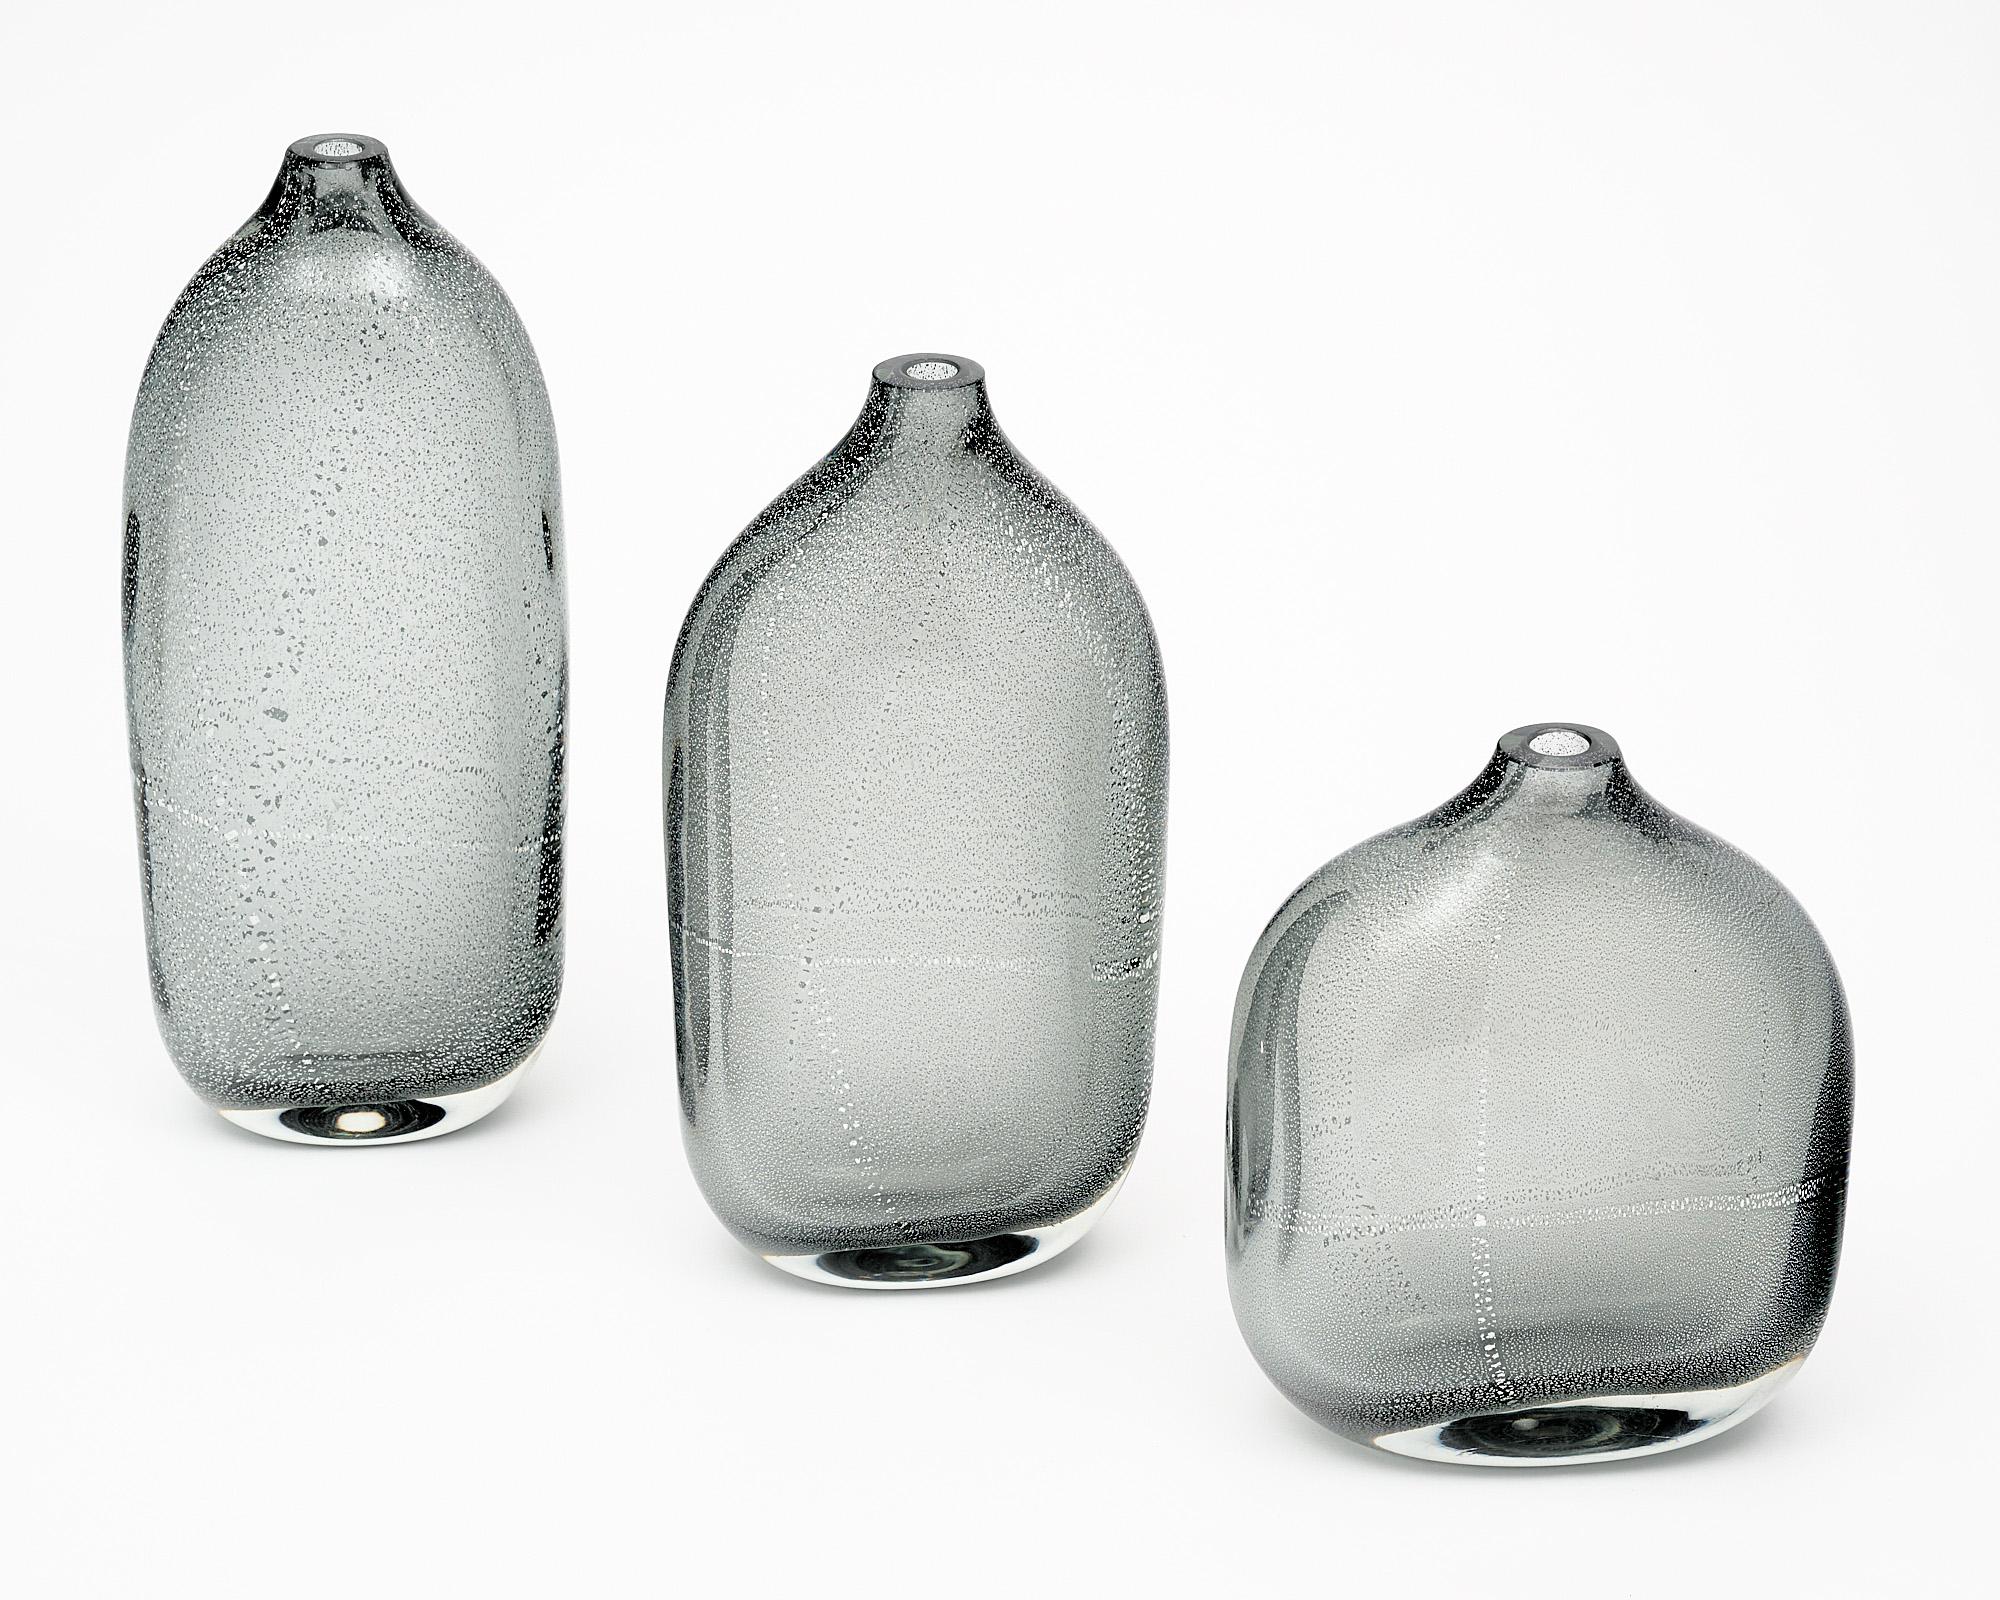 Set of three vases or bottles of hand-blown Murano glass. Each piece is crafted using the avventurina technique where silver leaf is fused within the glass during the glass blowing process. The price is for the set of three. They are signed by glass